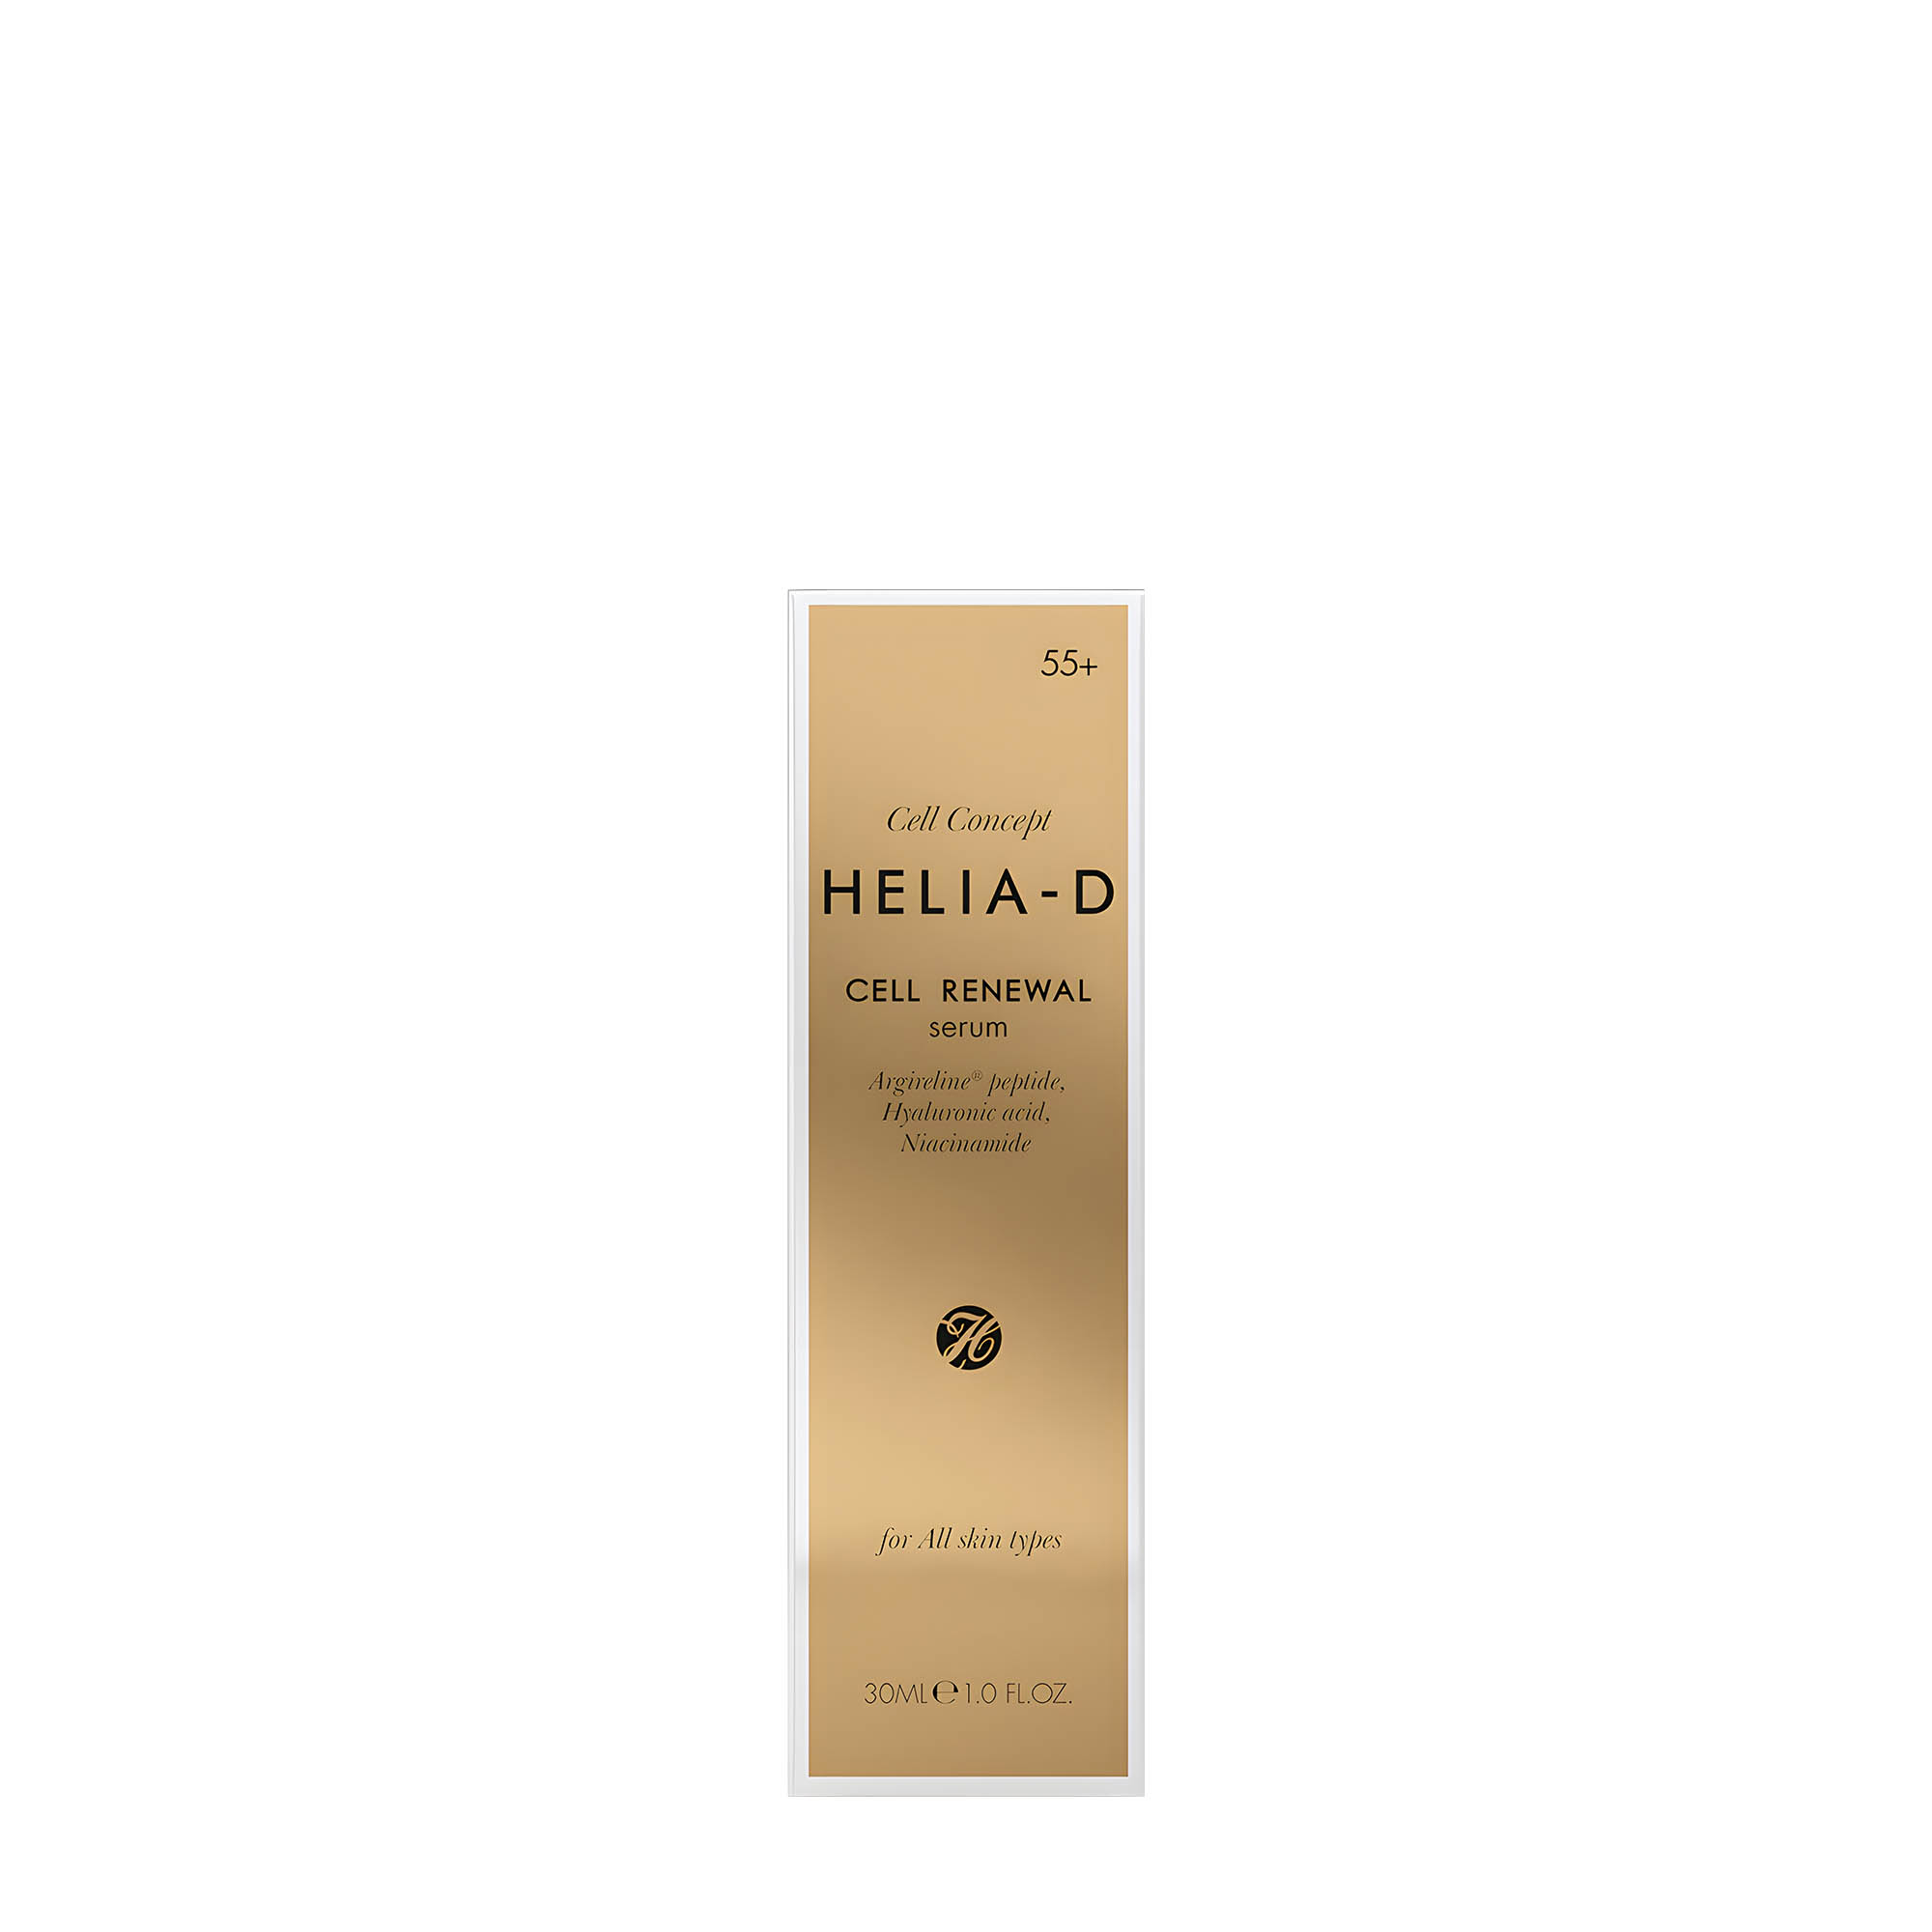 helia d face serum cell concept cell renewal 55+